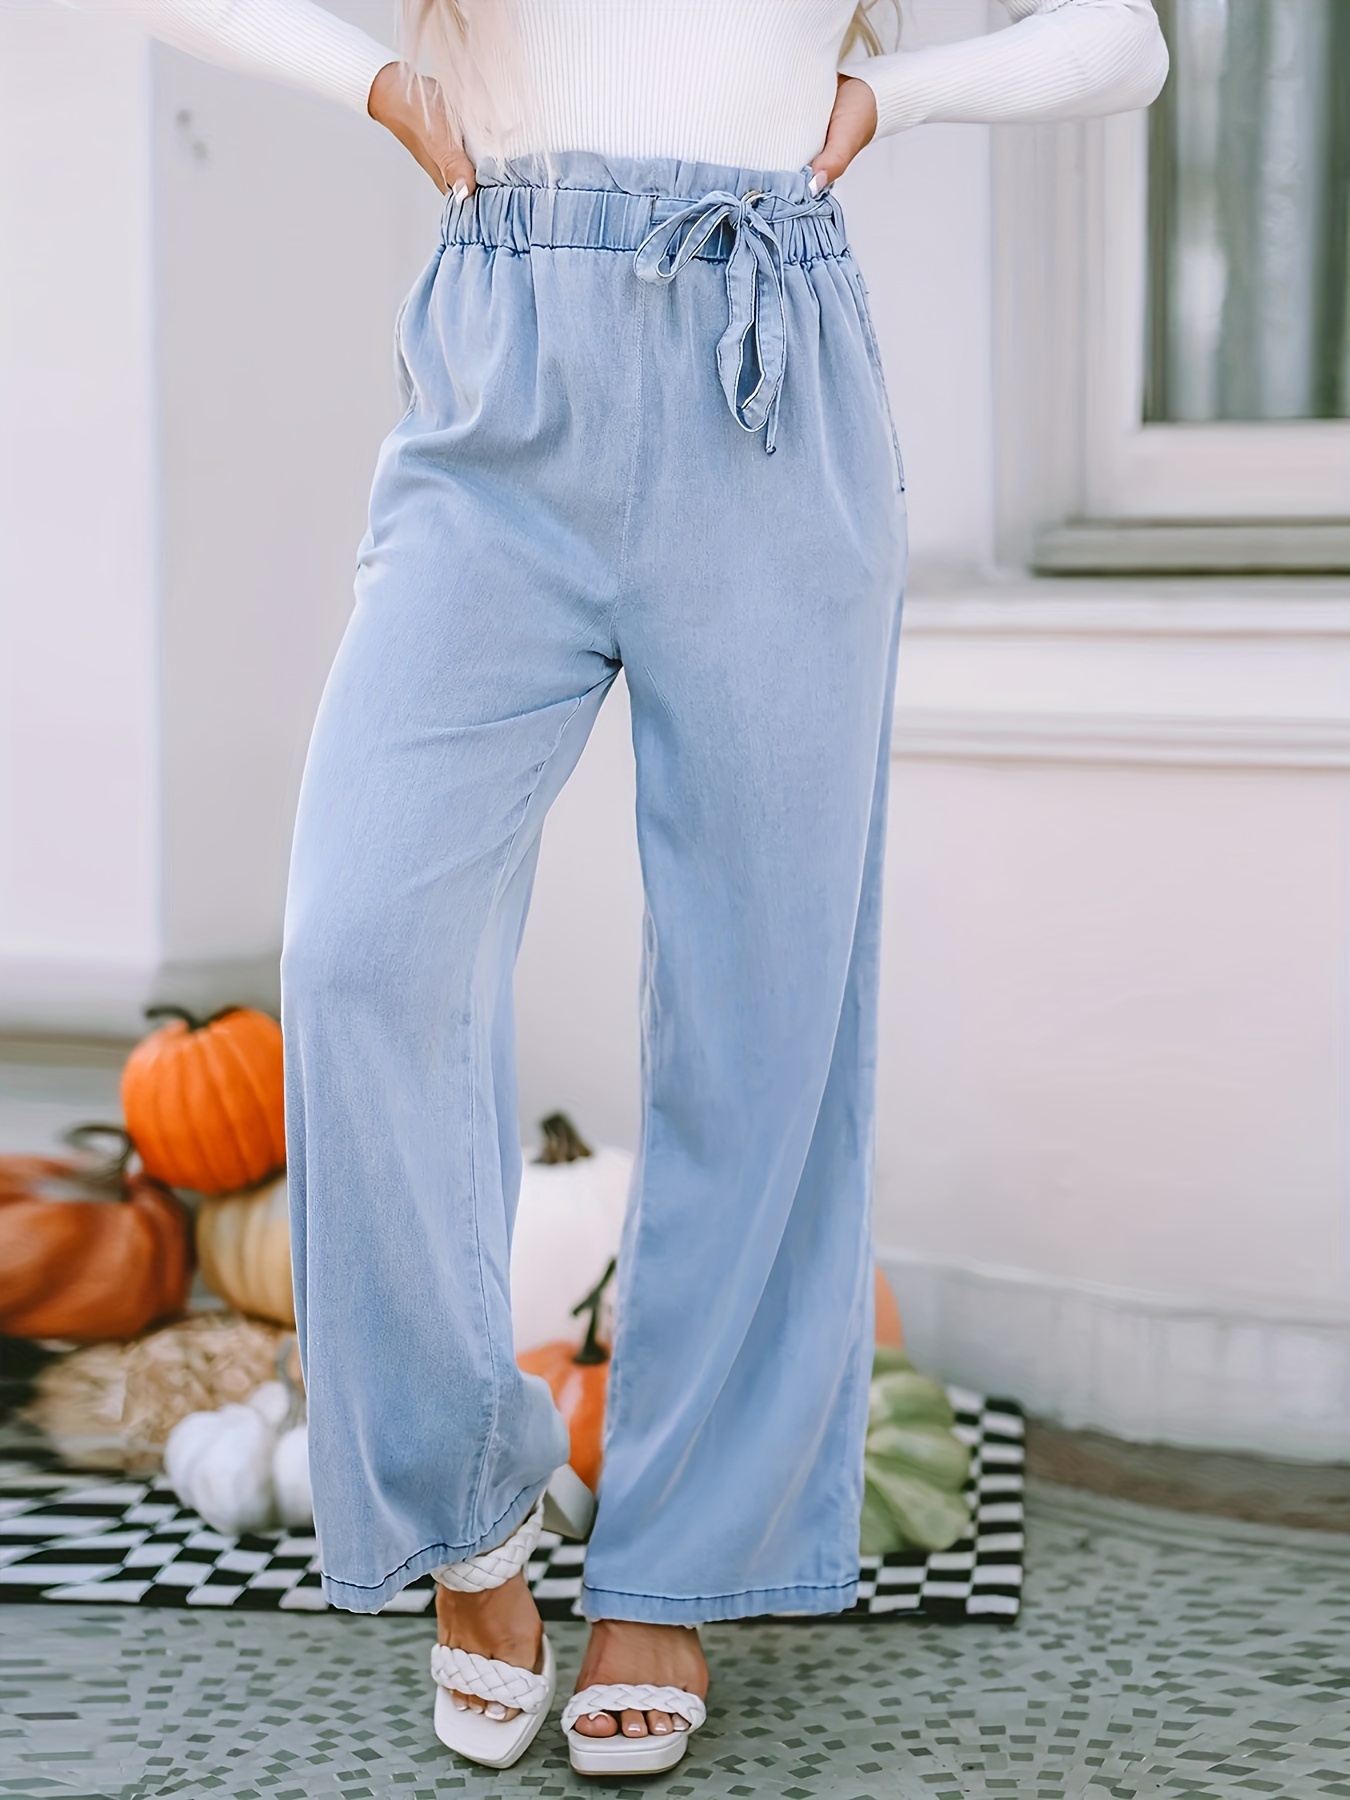 elastic waist washed straight jeans loose fit with waistband casual denim pants womens denim jeans clothing